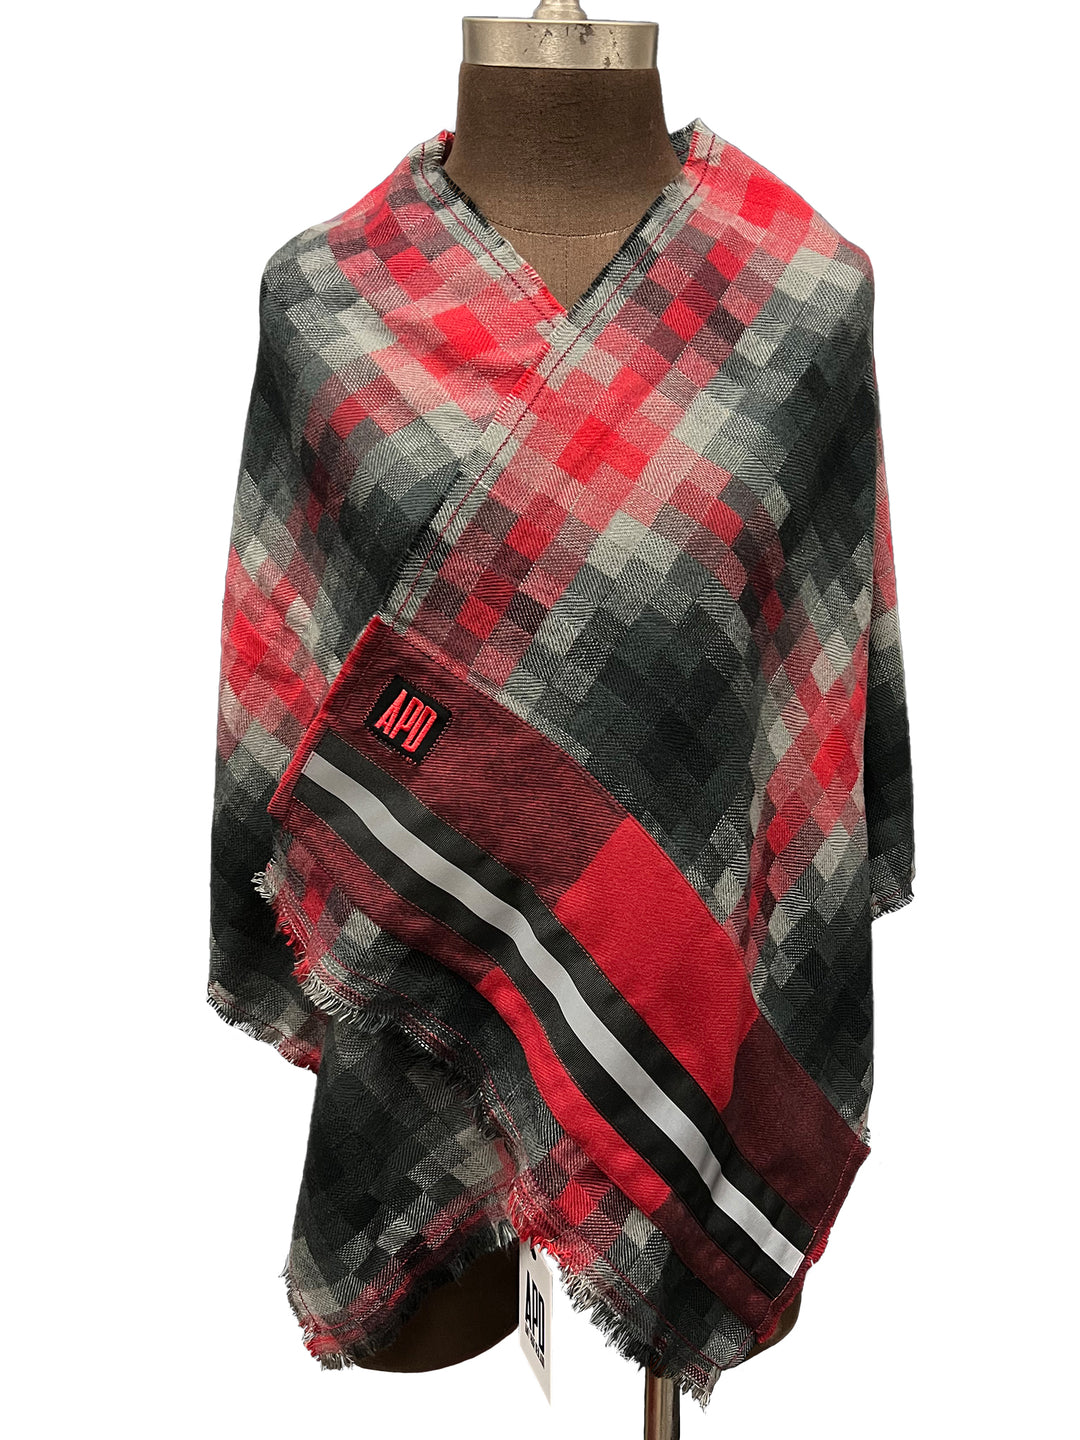 Fringed Scarf in Red, Black, and Grey Pixelated Print